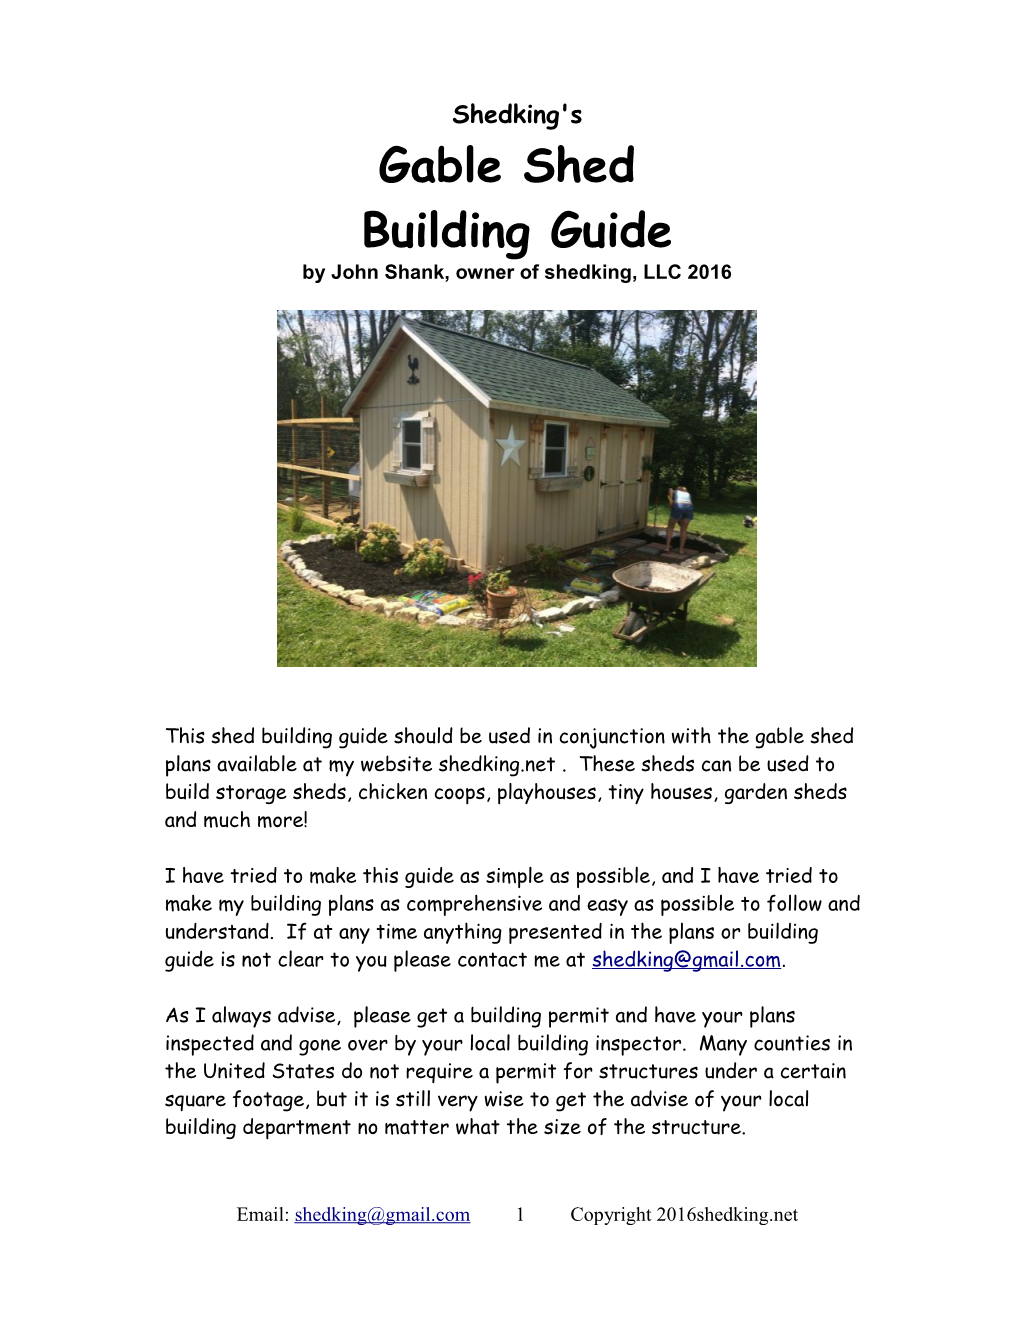 Gable Shed Building Guide by John Shank, Owner of Shedking, LLC 2016